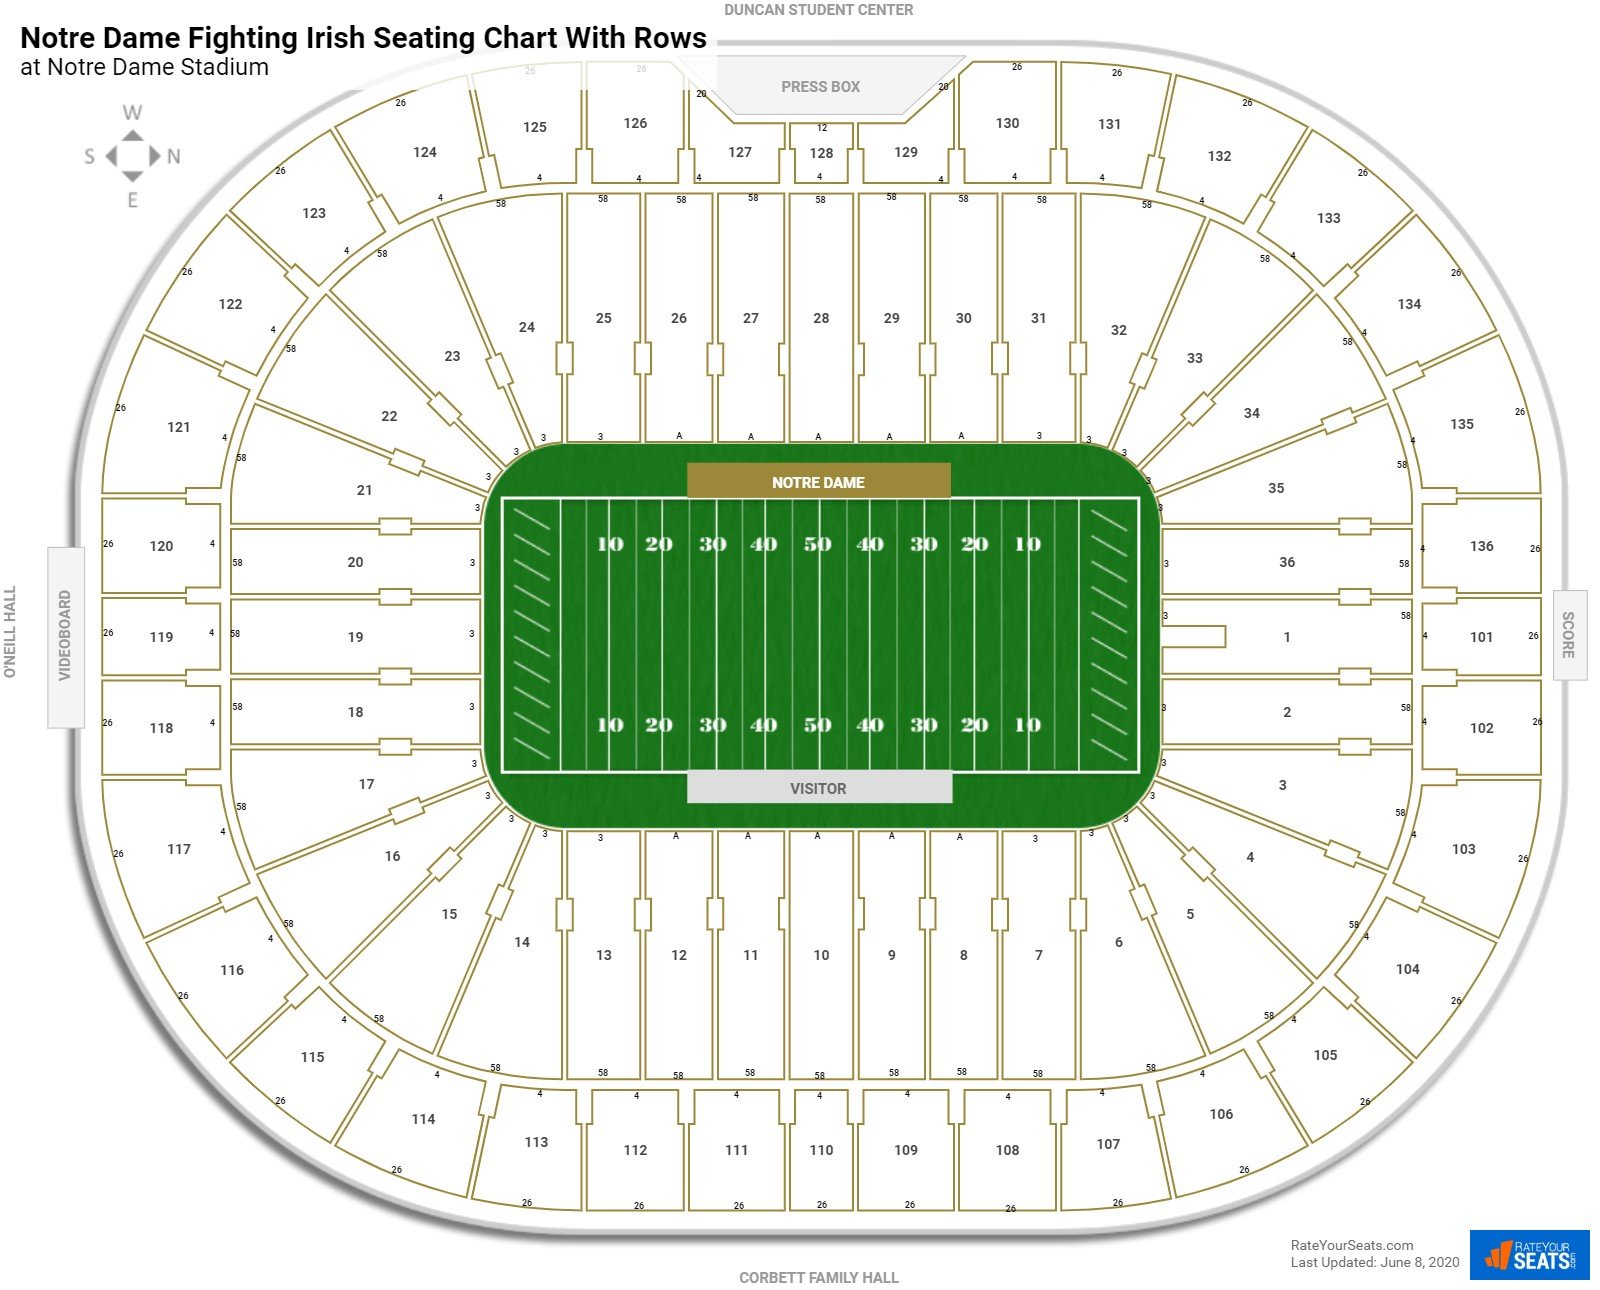 Notre Dame Stadium seating chart with row numbers